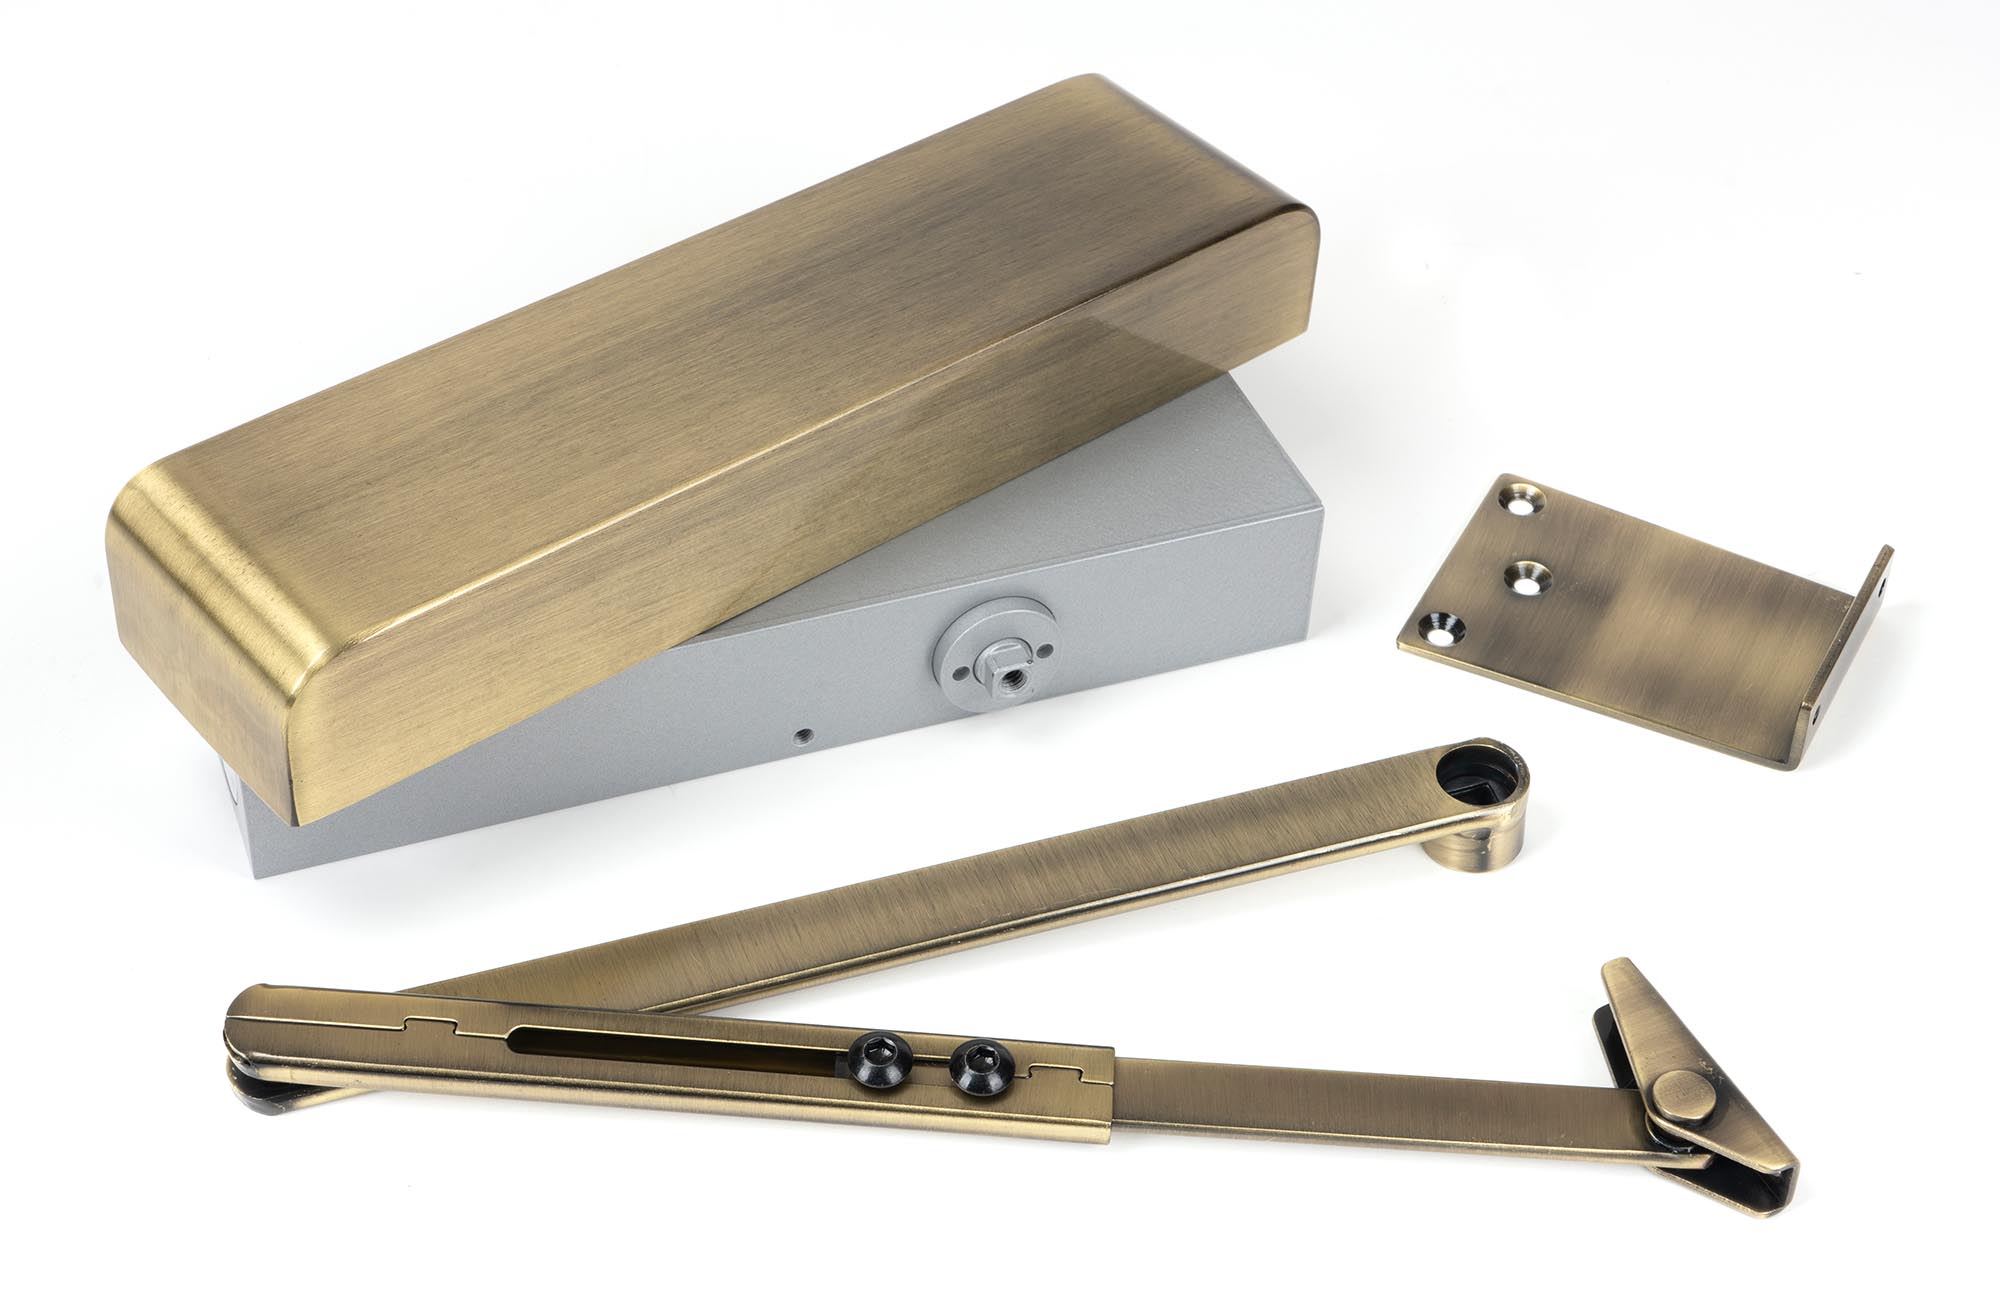 Aged Brass Size 2-5 Door Closer & Cover